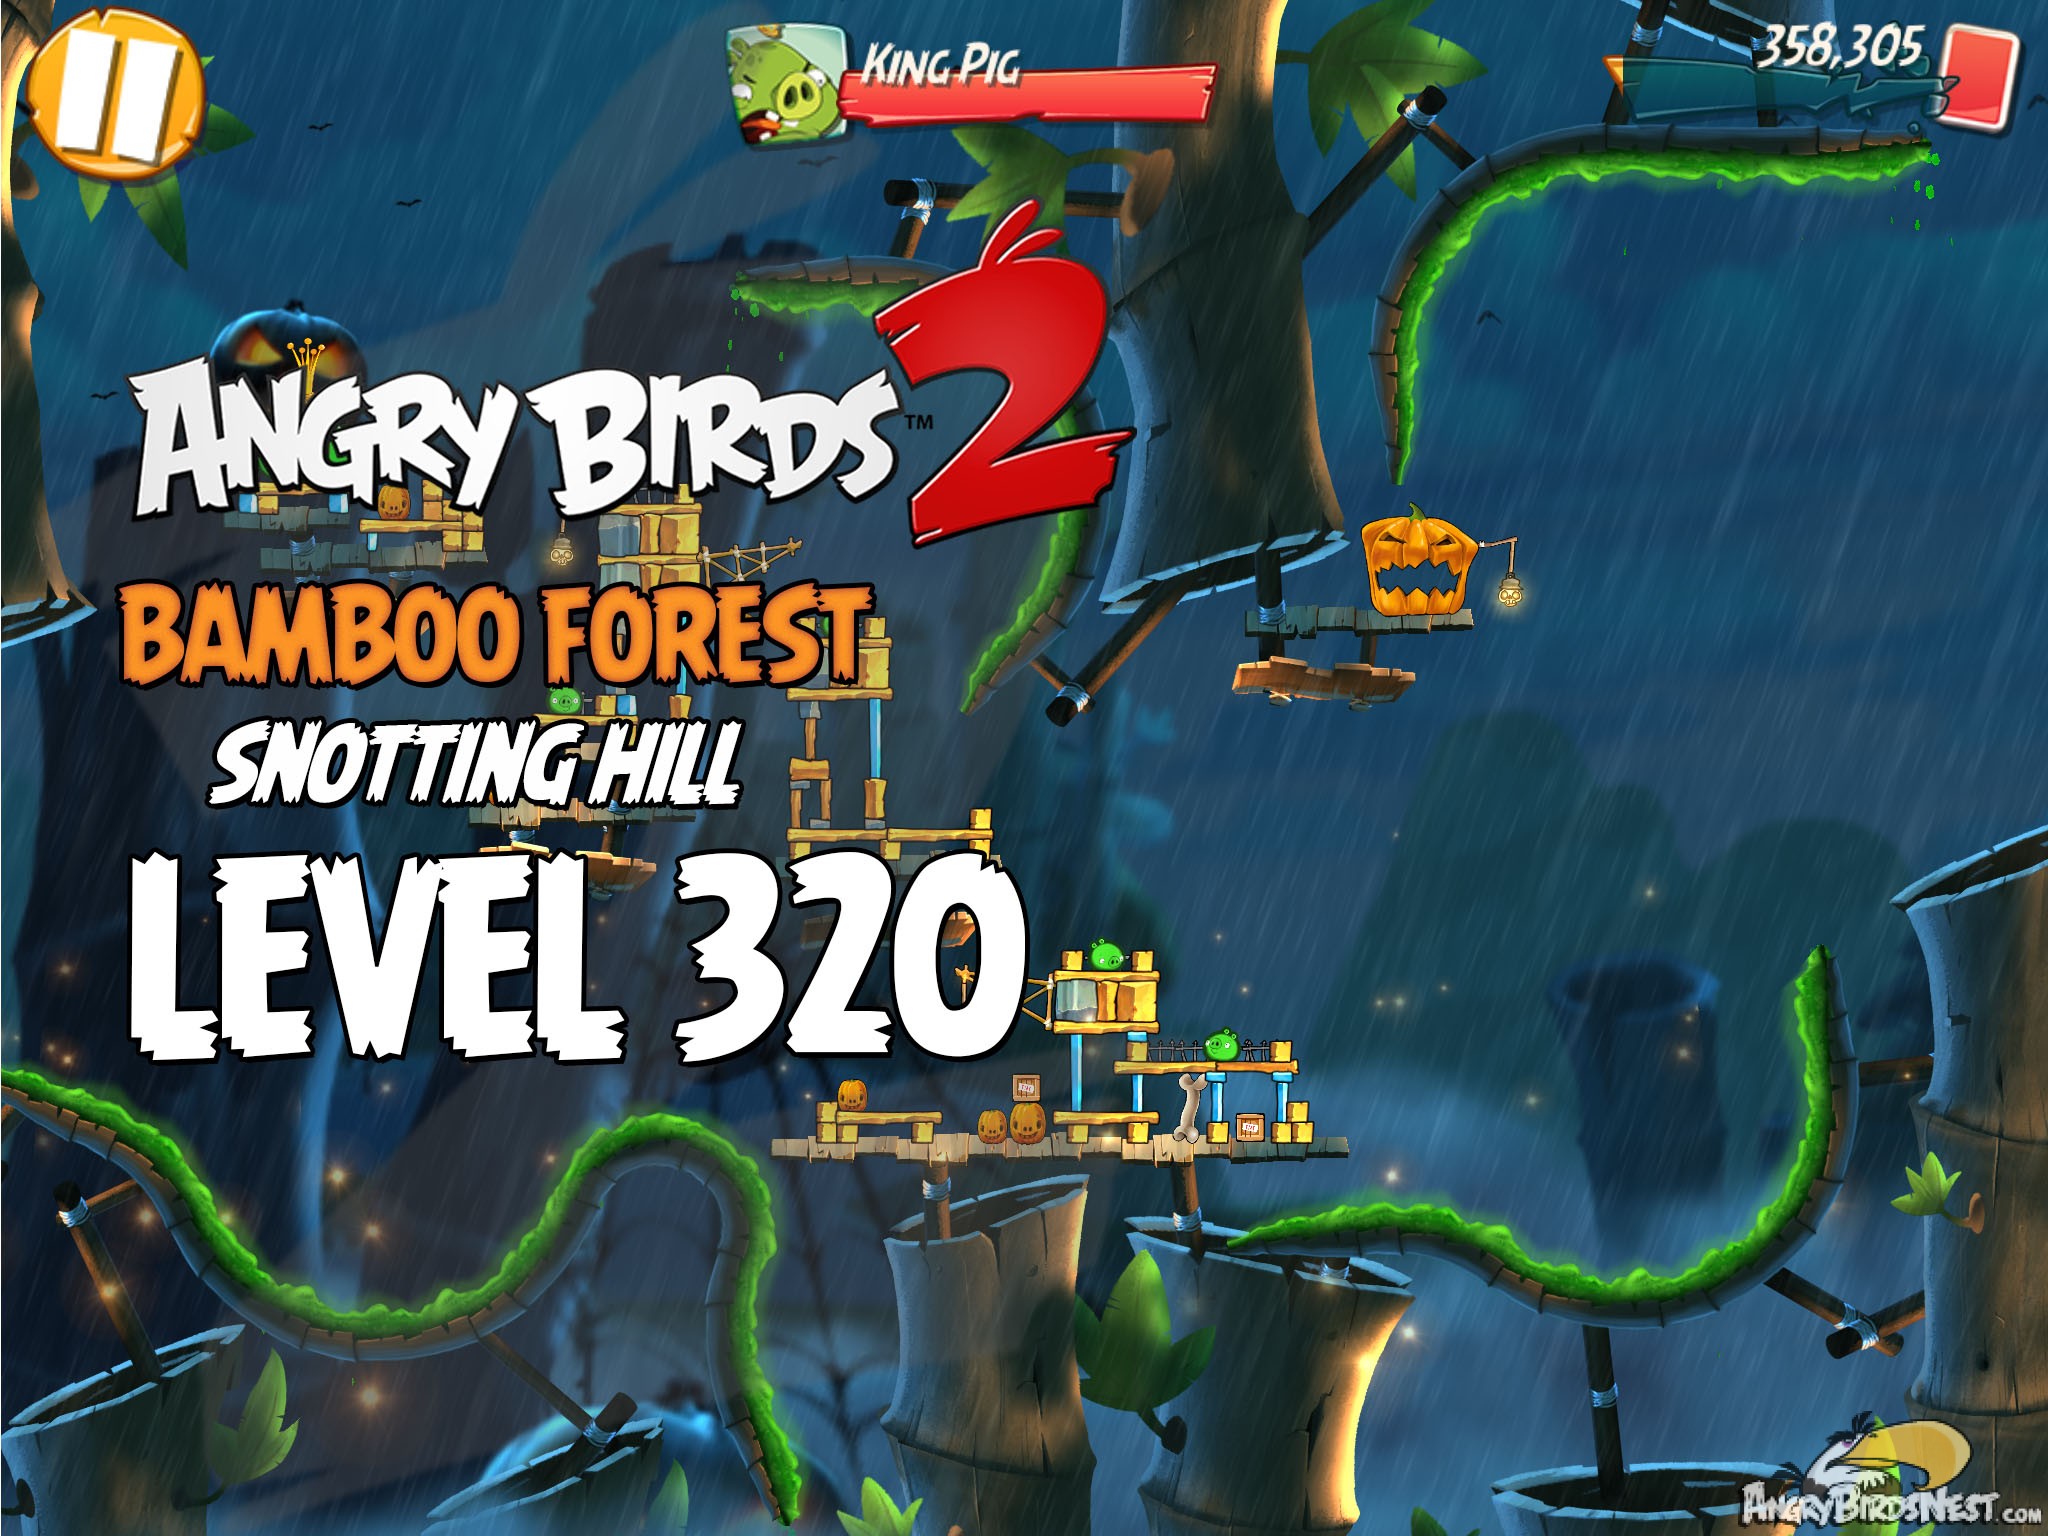 Angry Birds 2 Bamboo Forest Snotting Hill Level 320